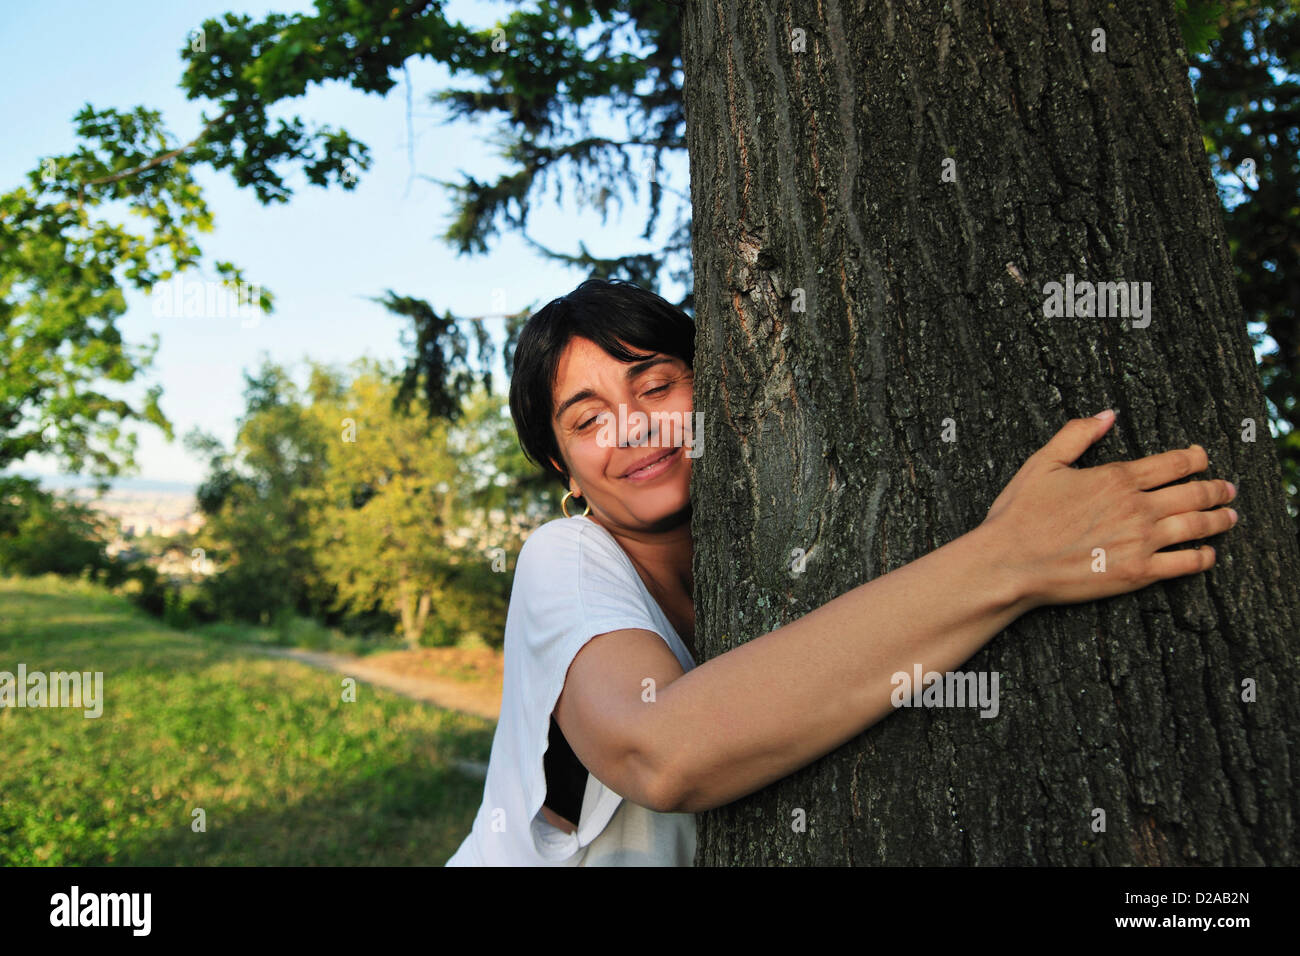 Woman hugging tree in forest Stock Photo